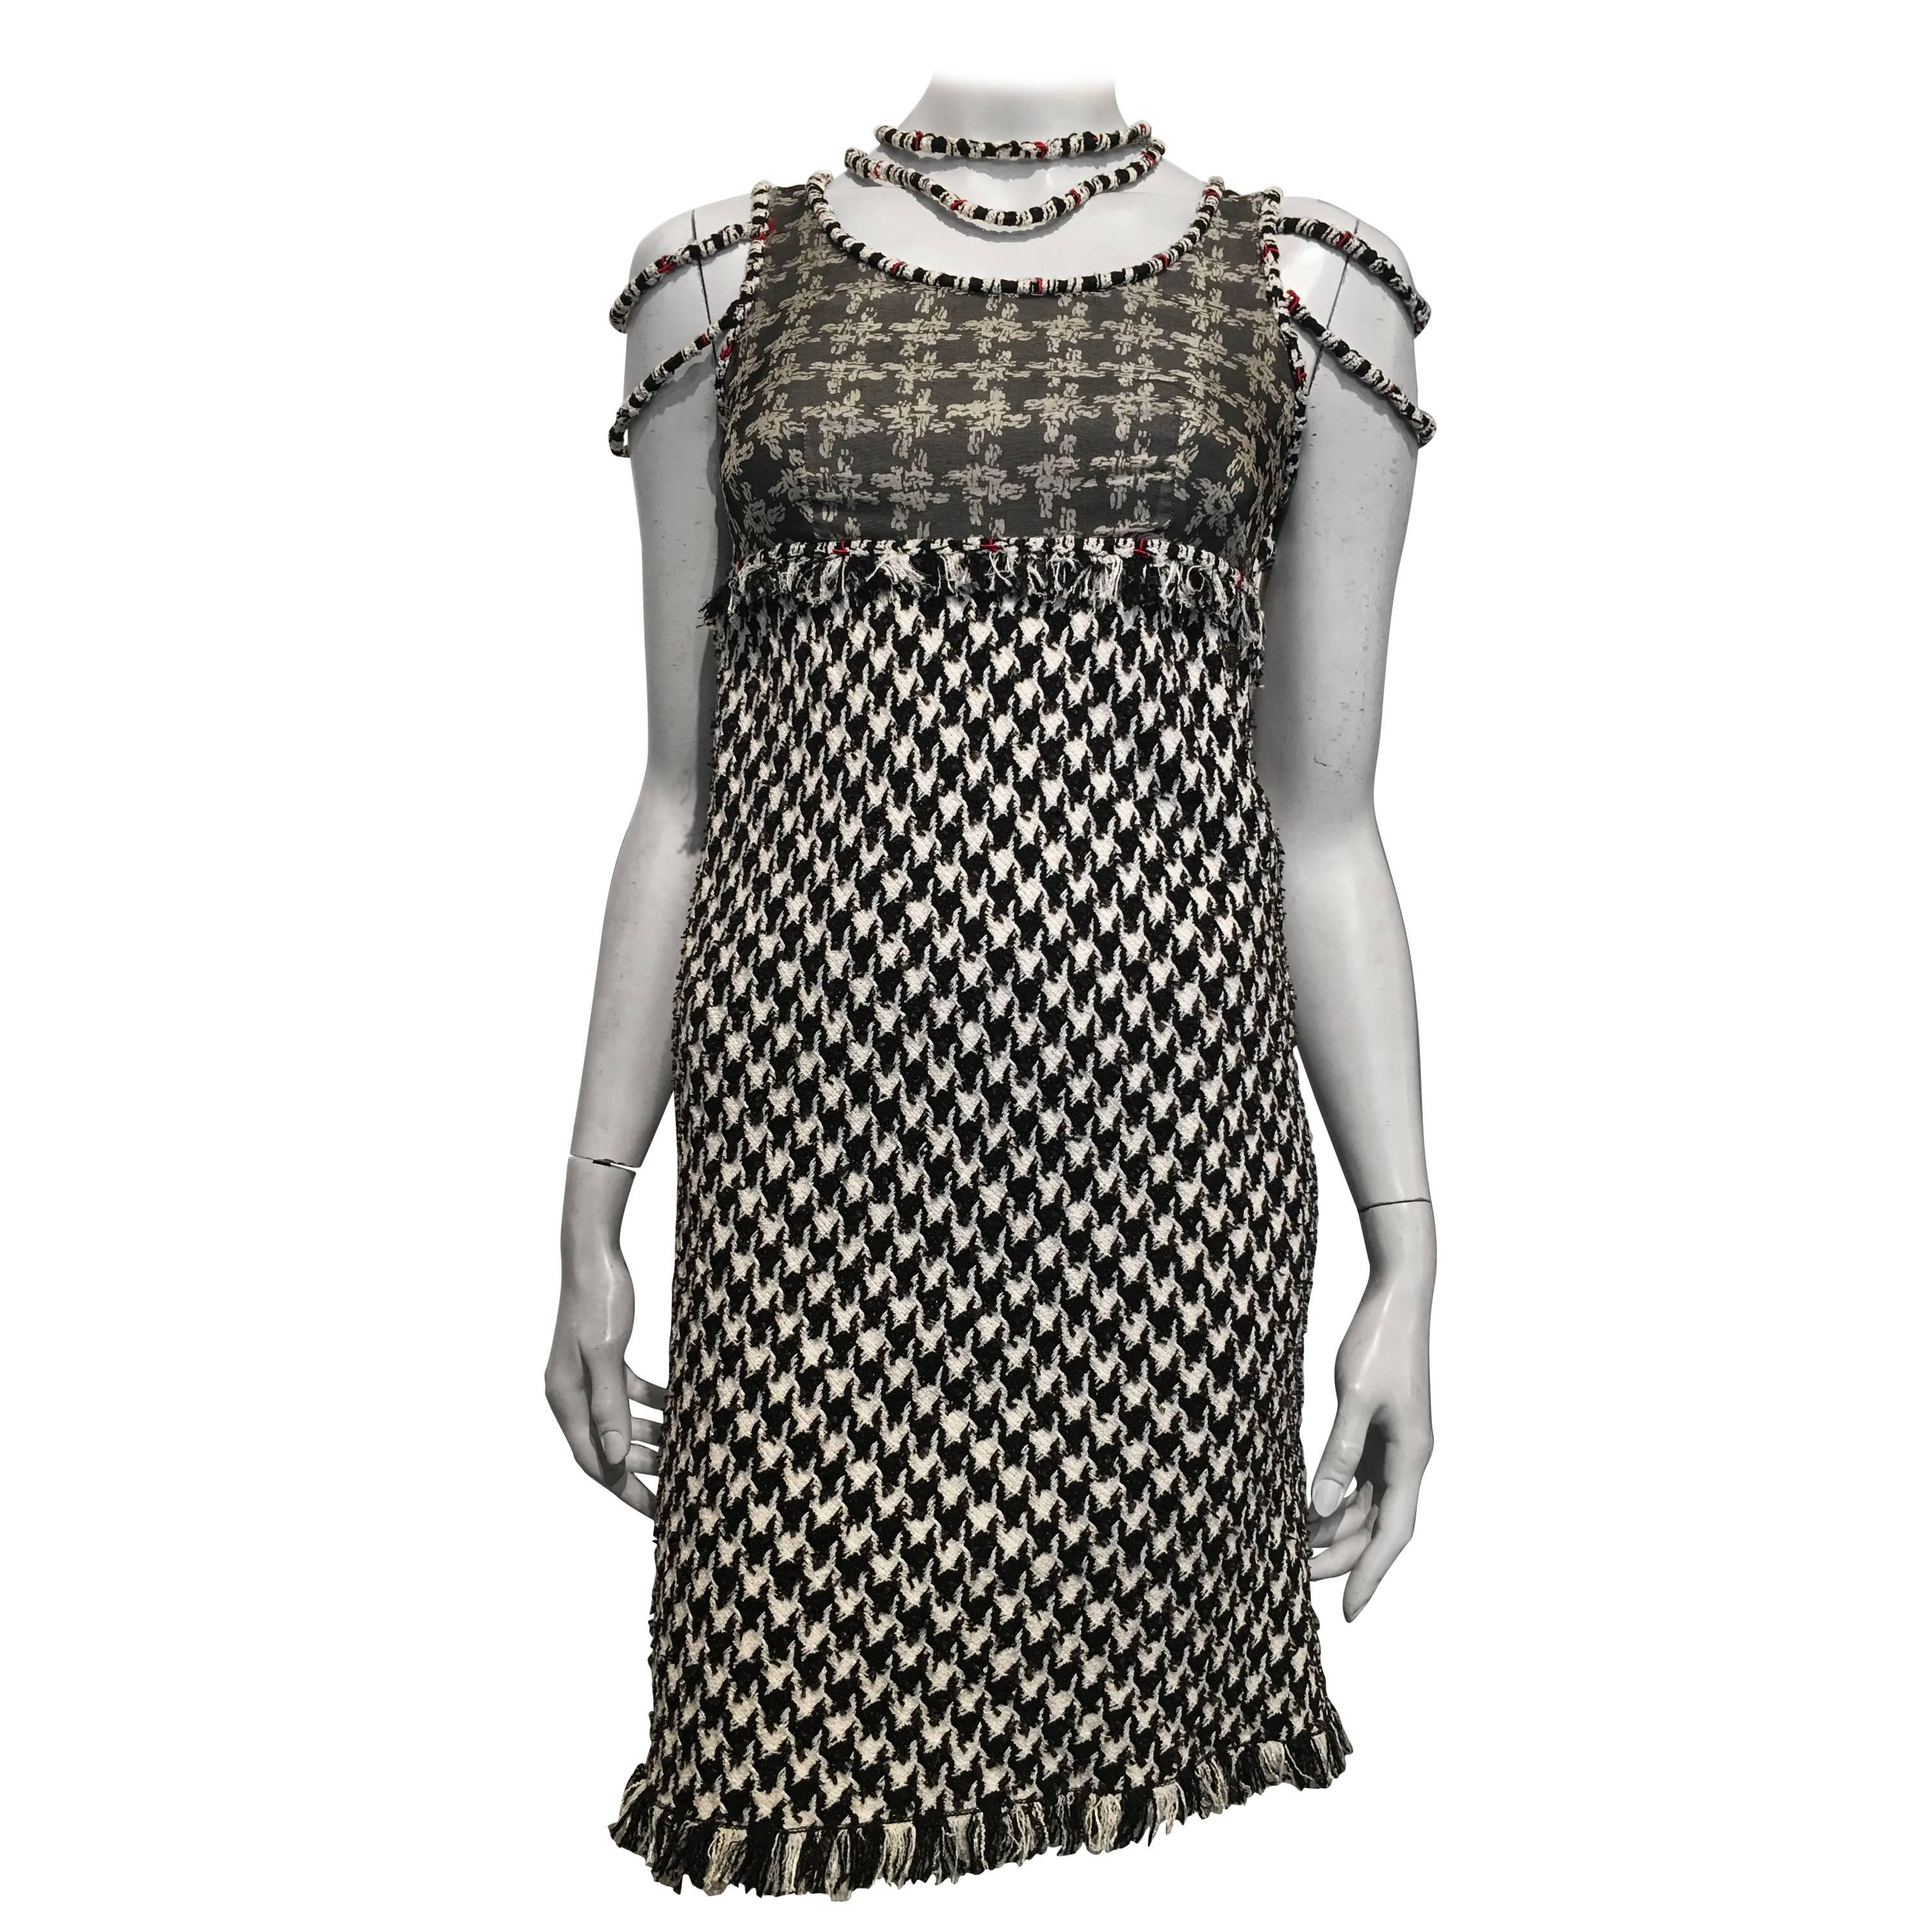 Chanel Black and White Tweed Dress size 34 (2) For Sale